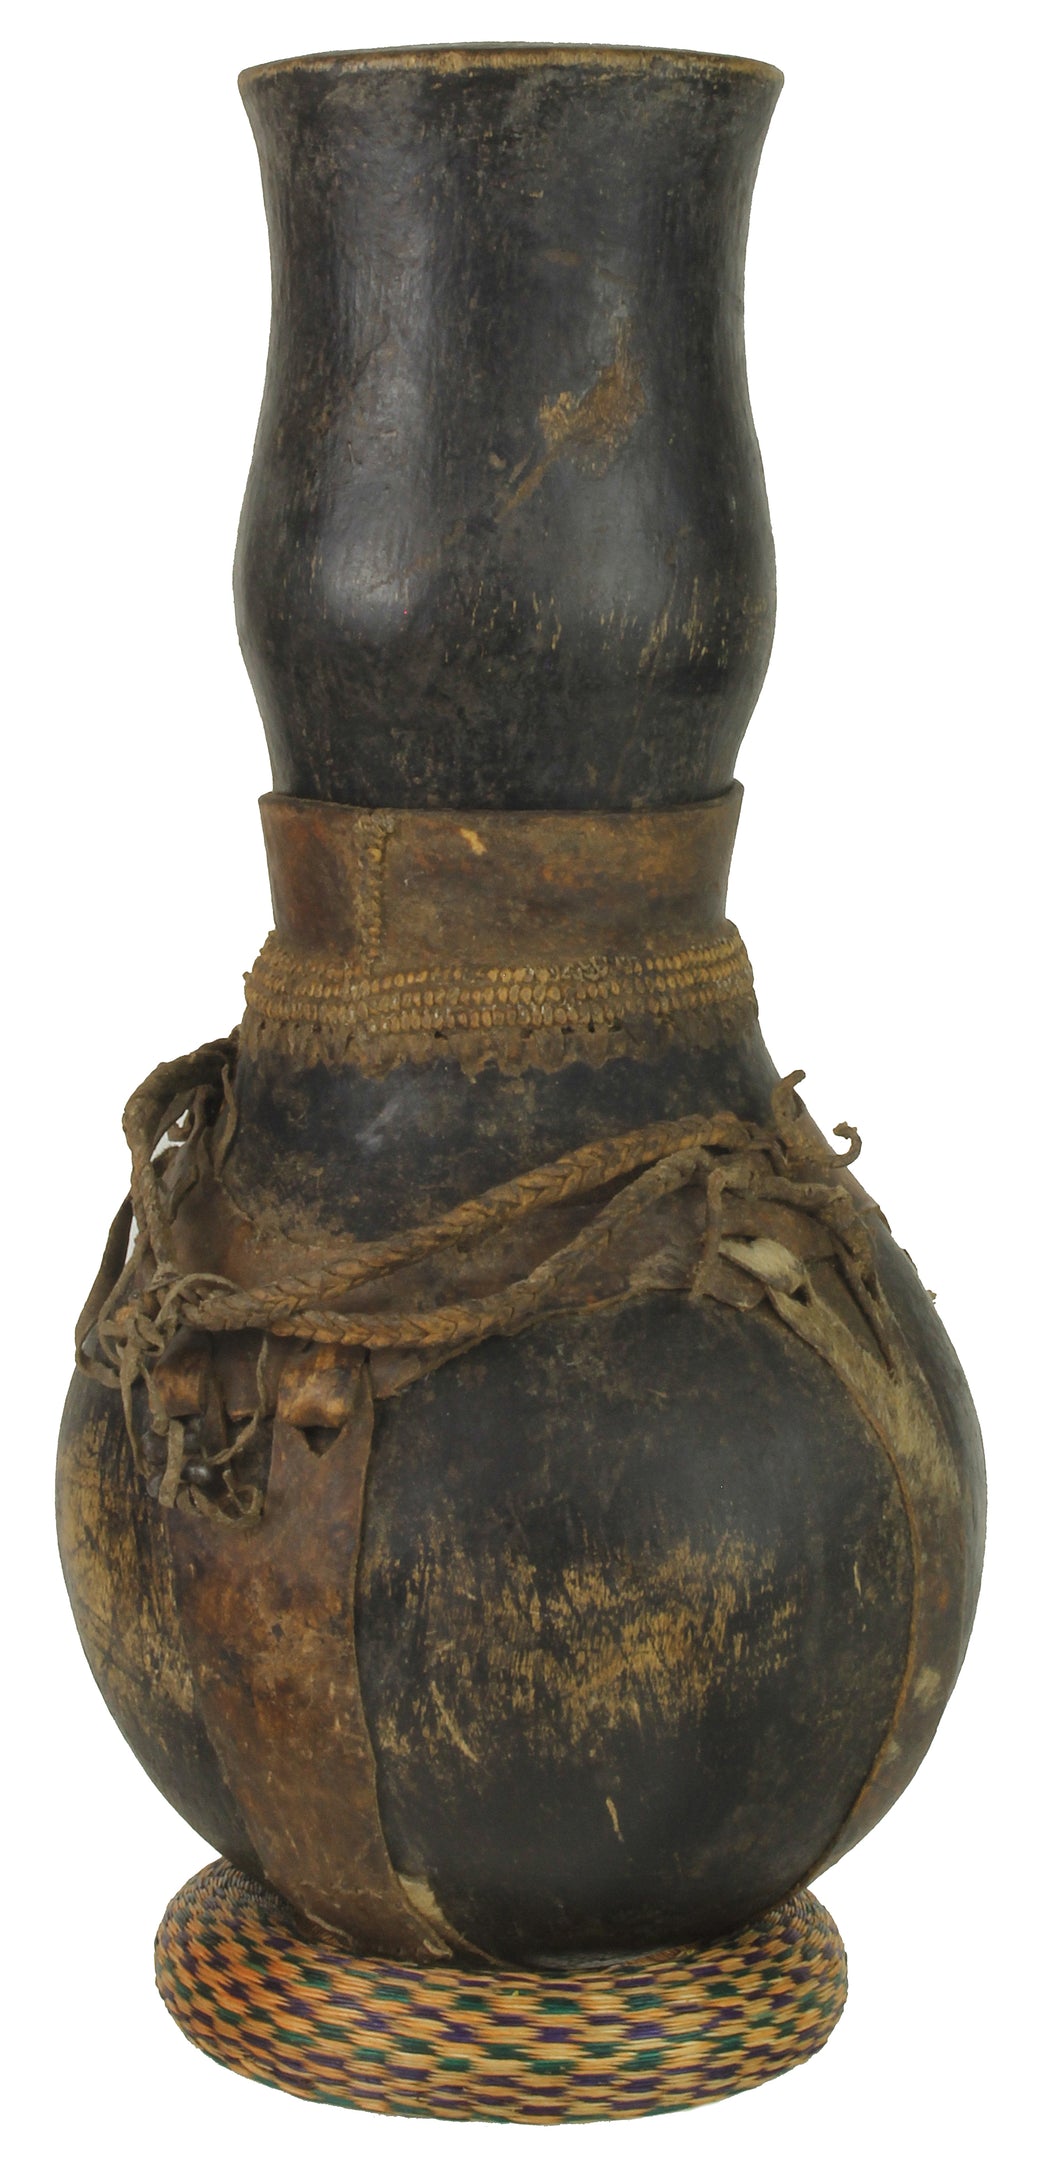 Vintage Wooden & Leather Milk Vessel from Congo, Africa | 15" - Niger Bend